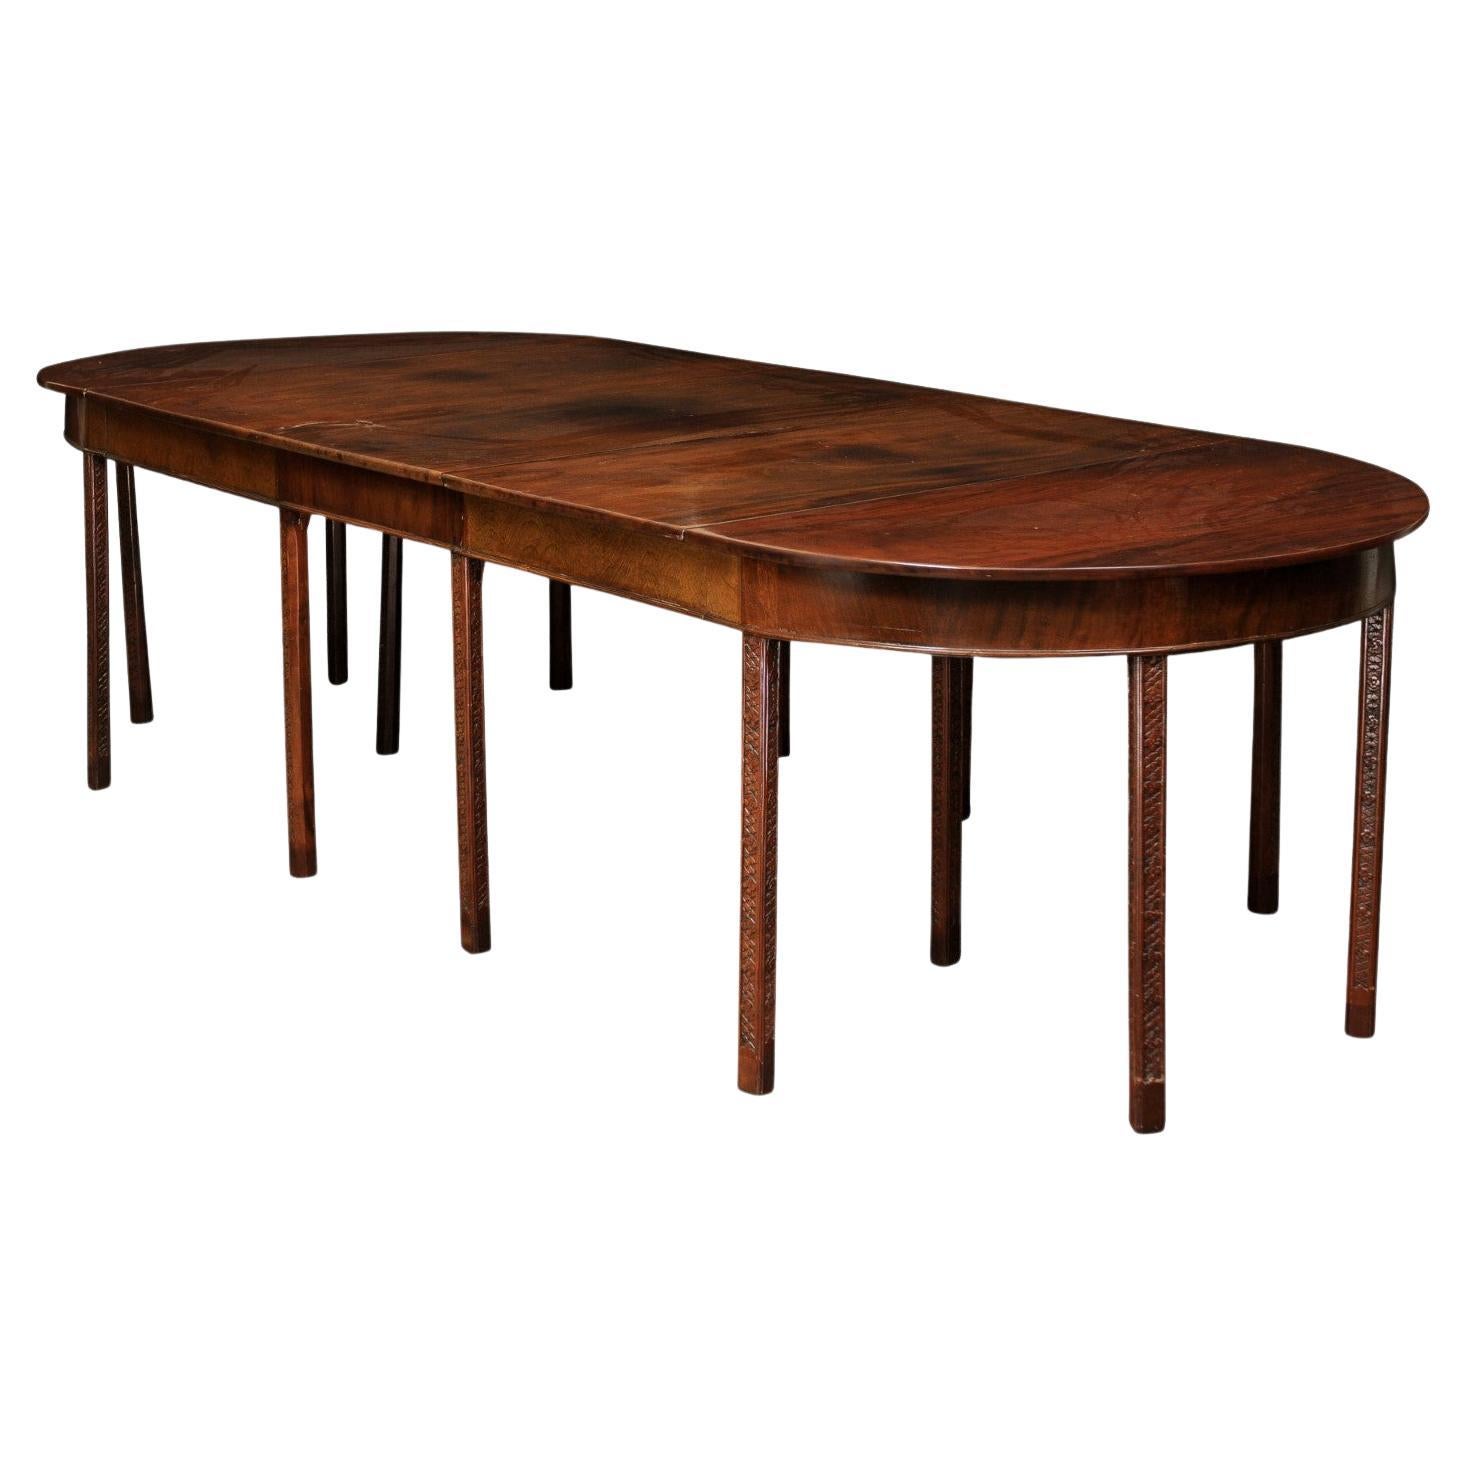 19th Century English Mahogany Dining Table with Carved Legs & 2 Leaves For Sale